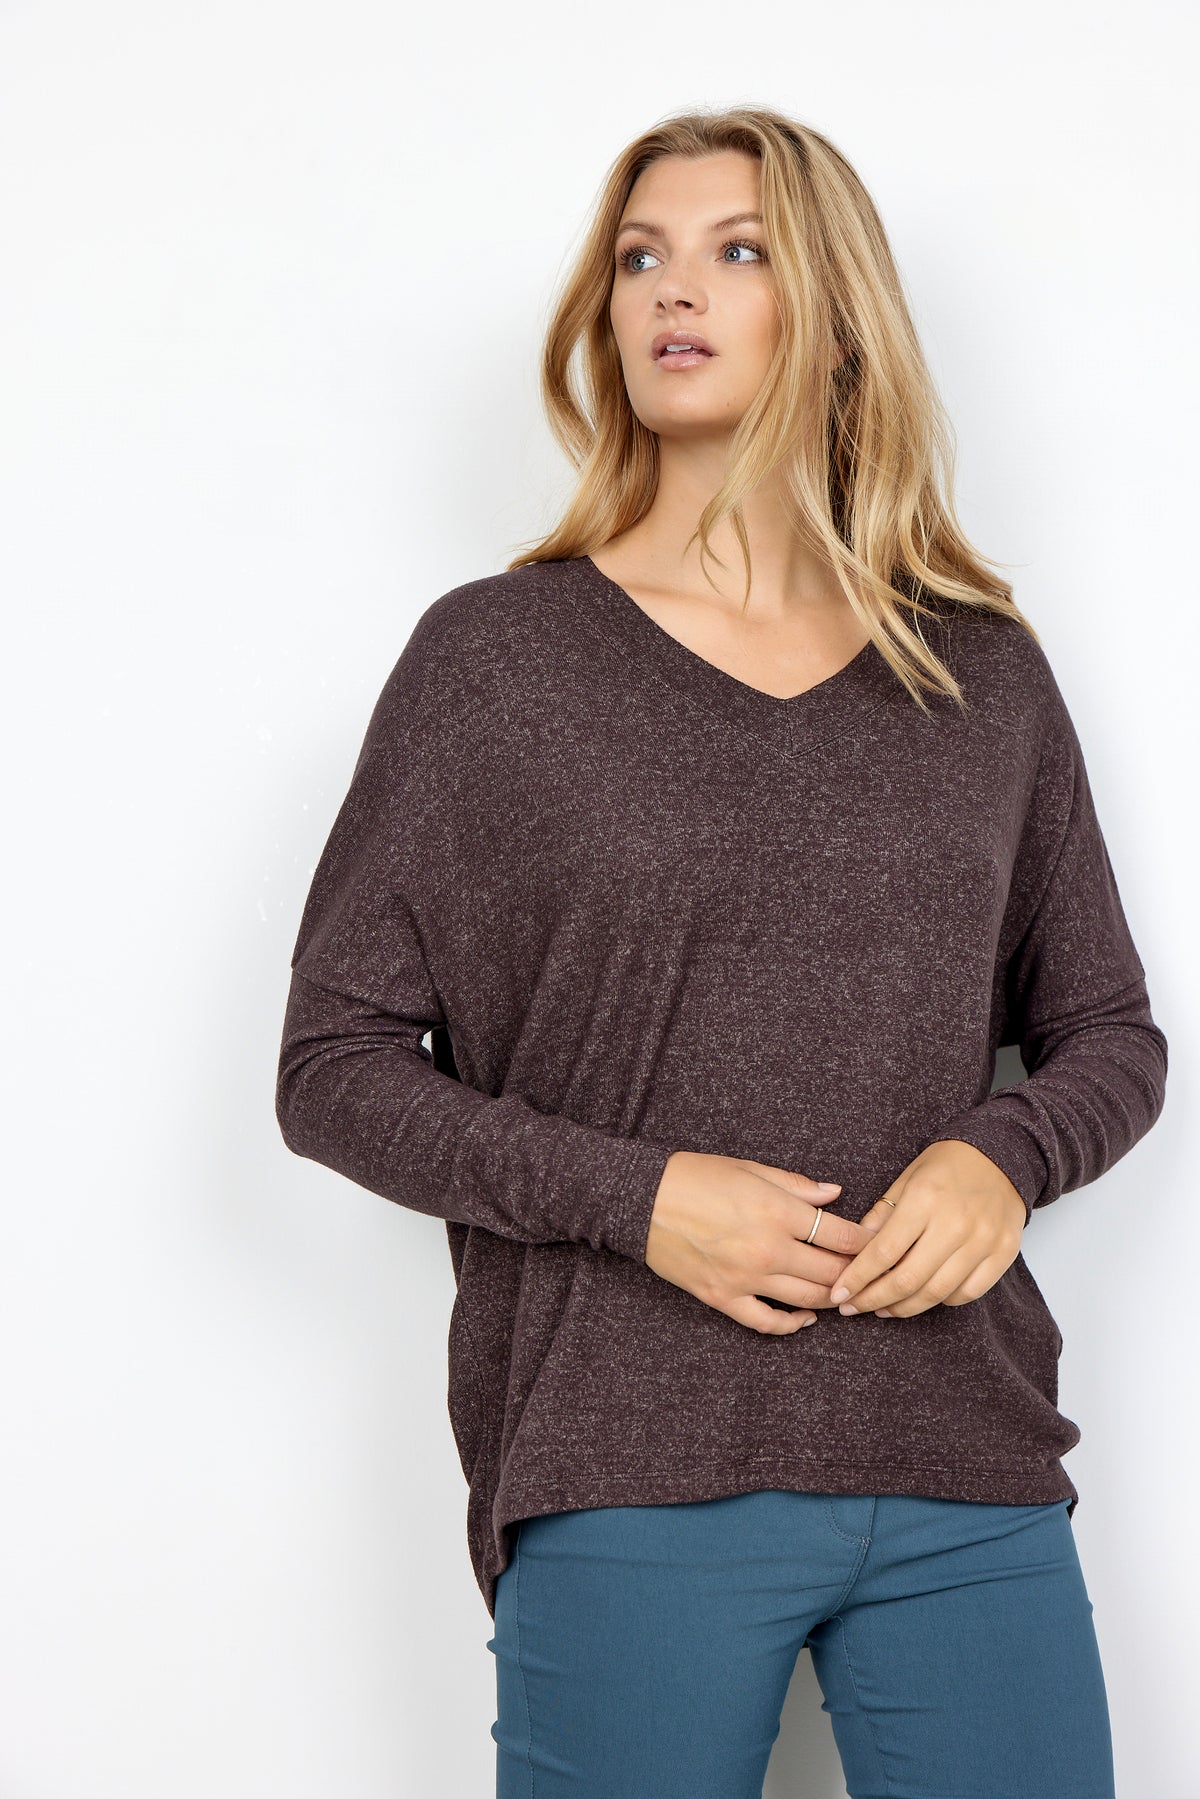 The Helena Top in Coffee